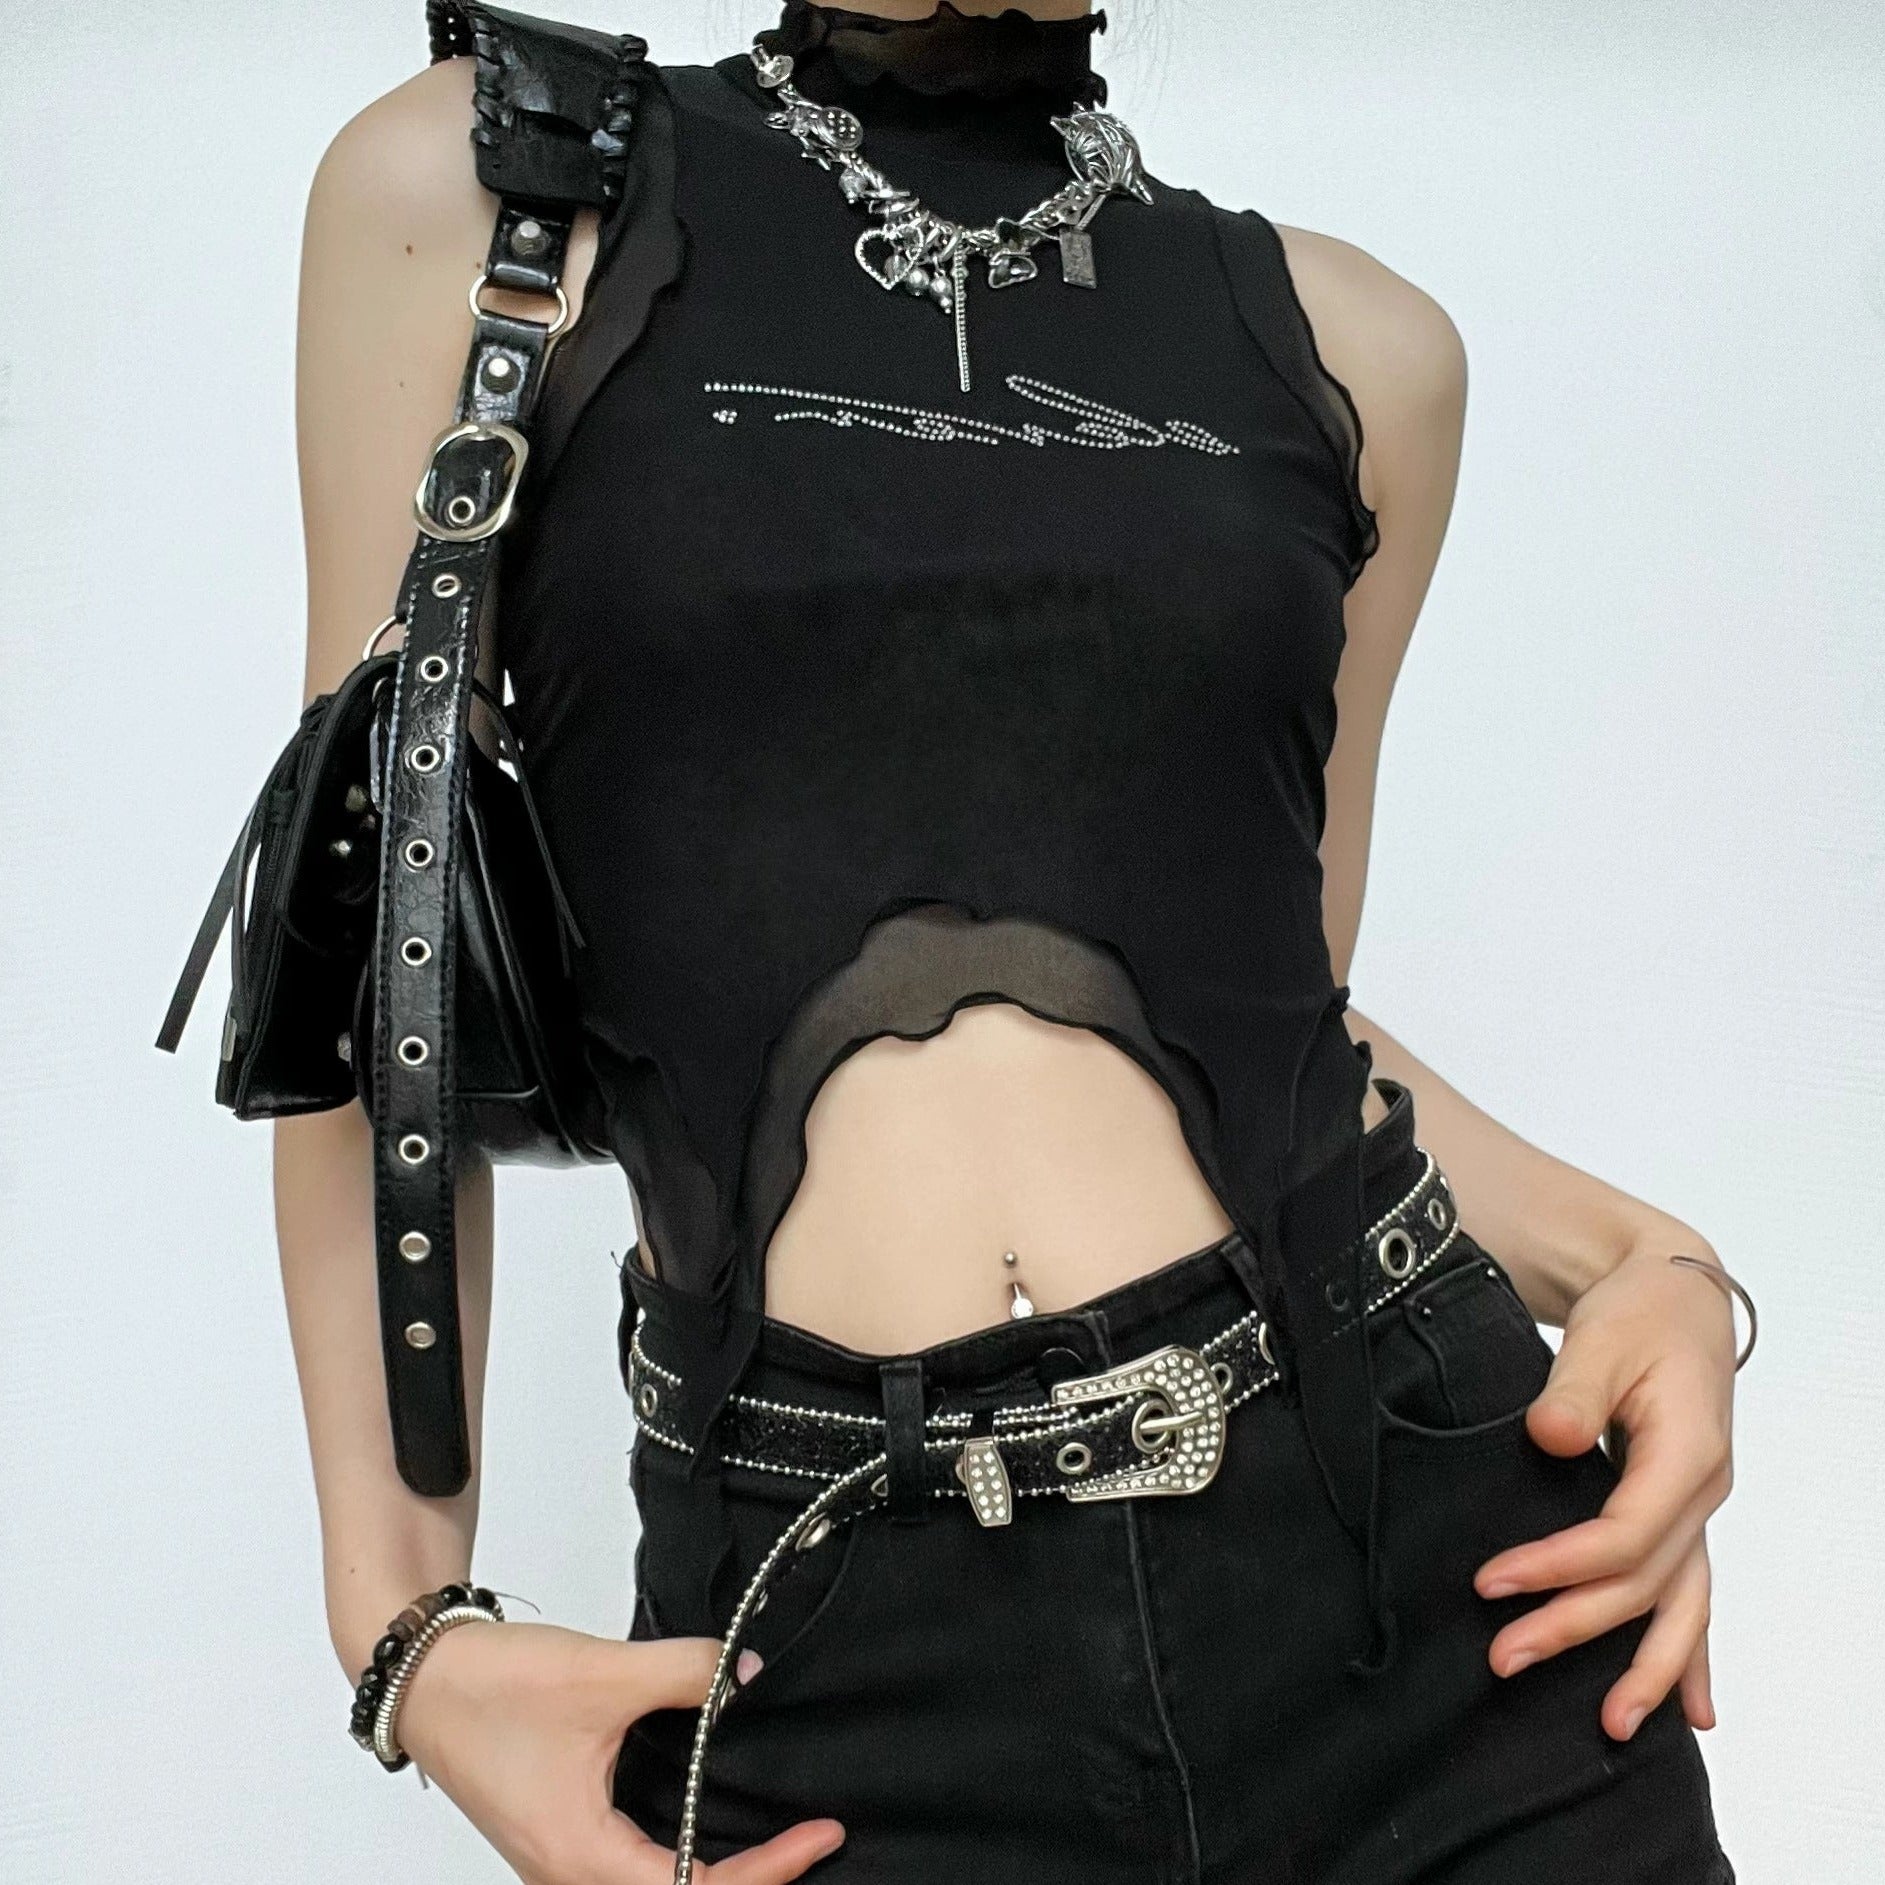 Sheer mesh see through beaded high neck crop top y2k 90s Revival Techno Fashion